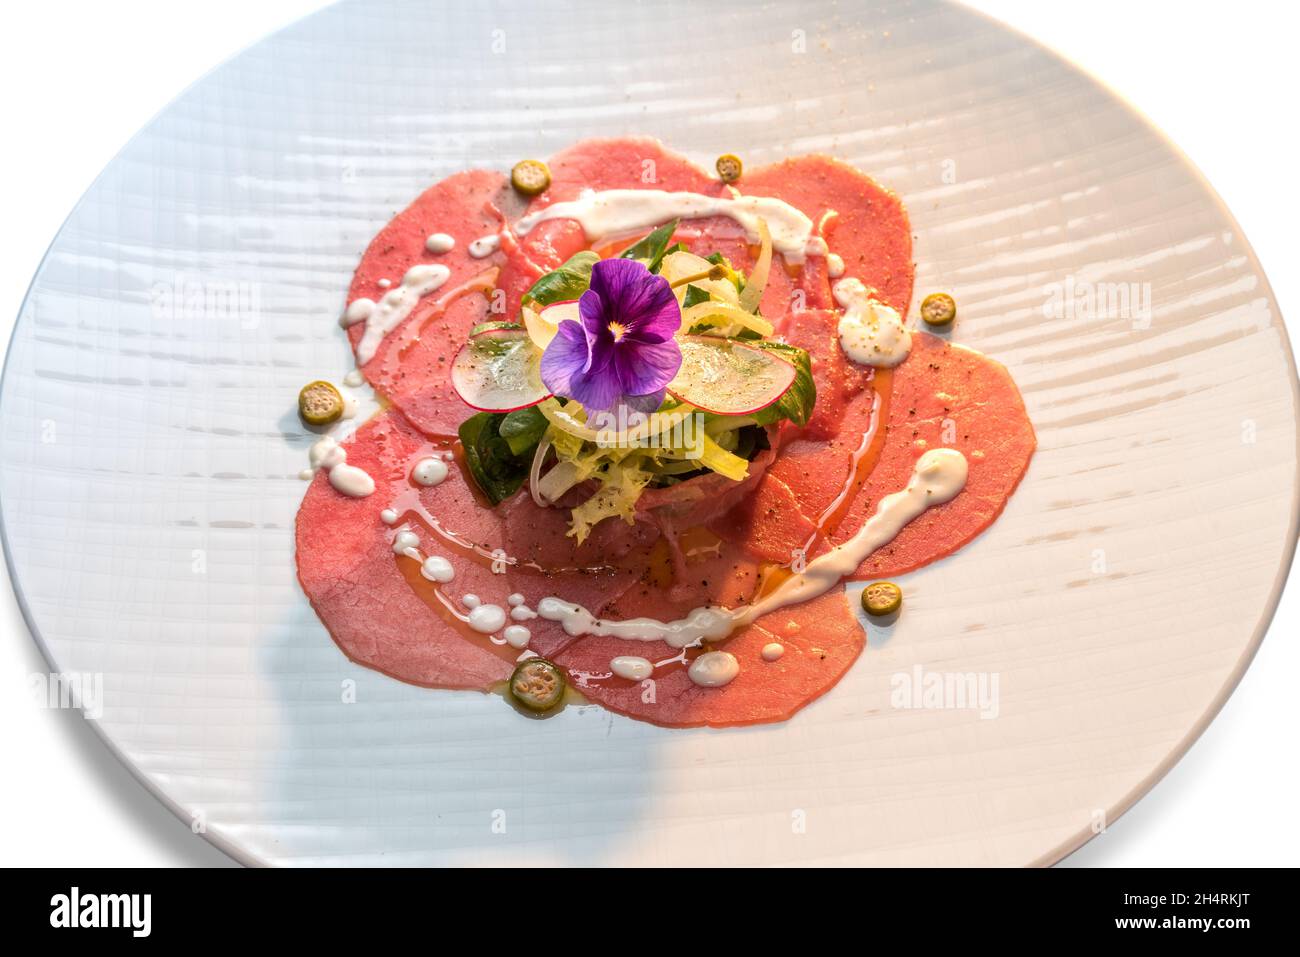 Raw beef carpaccio, Slices of raw veal fassone meat with salad, radishes, capers and violet flower edible in white dish Stock Photo